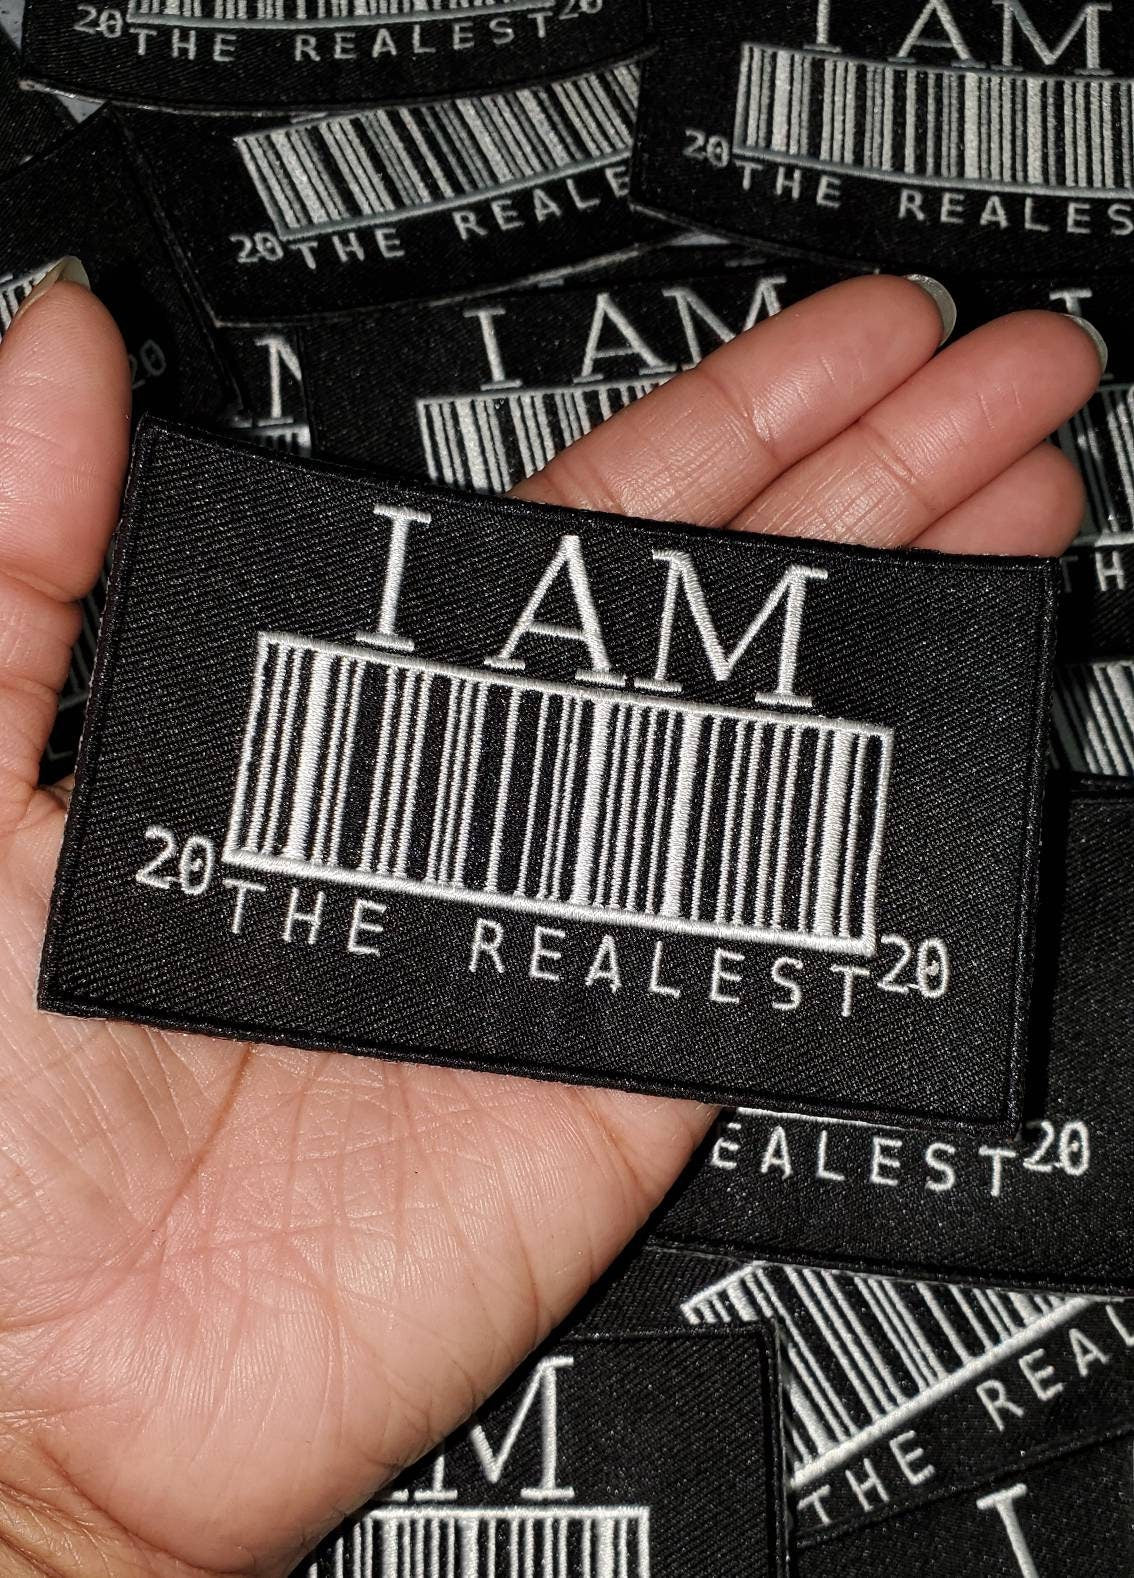 New Arrival, "I Am the Realest 20|20" Patch with Barcode, Iron-On Embroidered Applique; Patch for Clothing, Size 4"x3", Black & White Patch